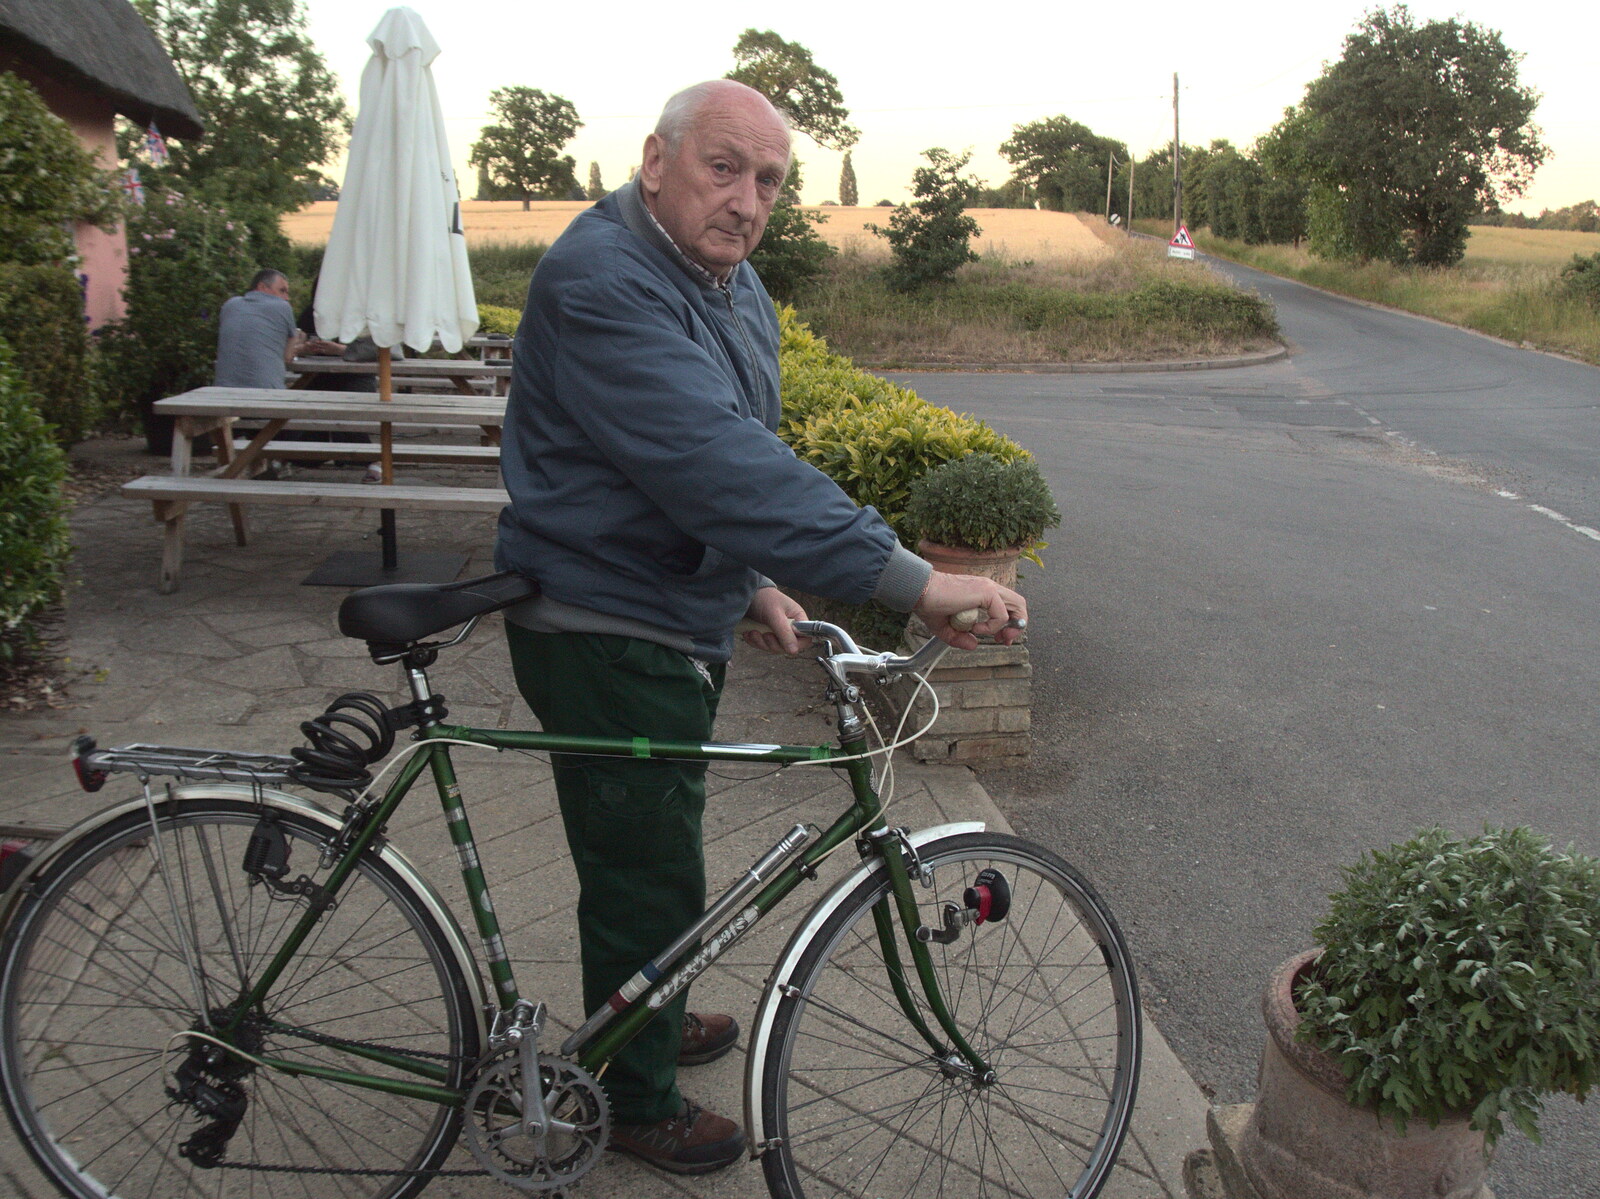 Mick 'gasses up the Hog' and heads off from Pizza at the Village Hall, Brome, Suffolk - 24th June 2022